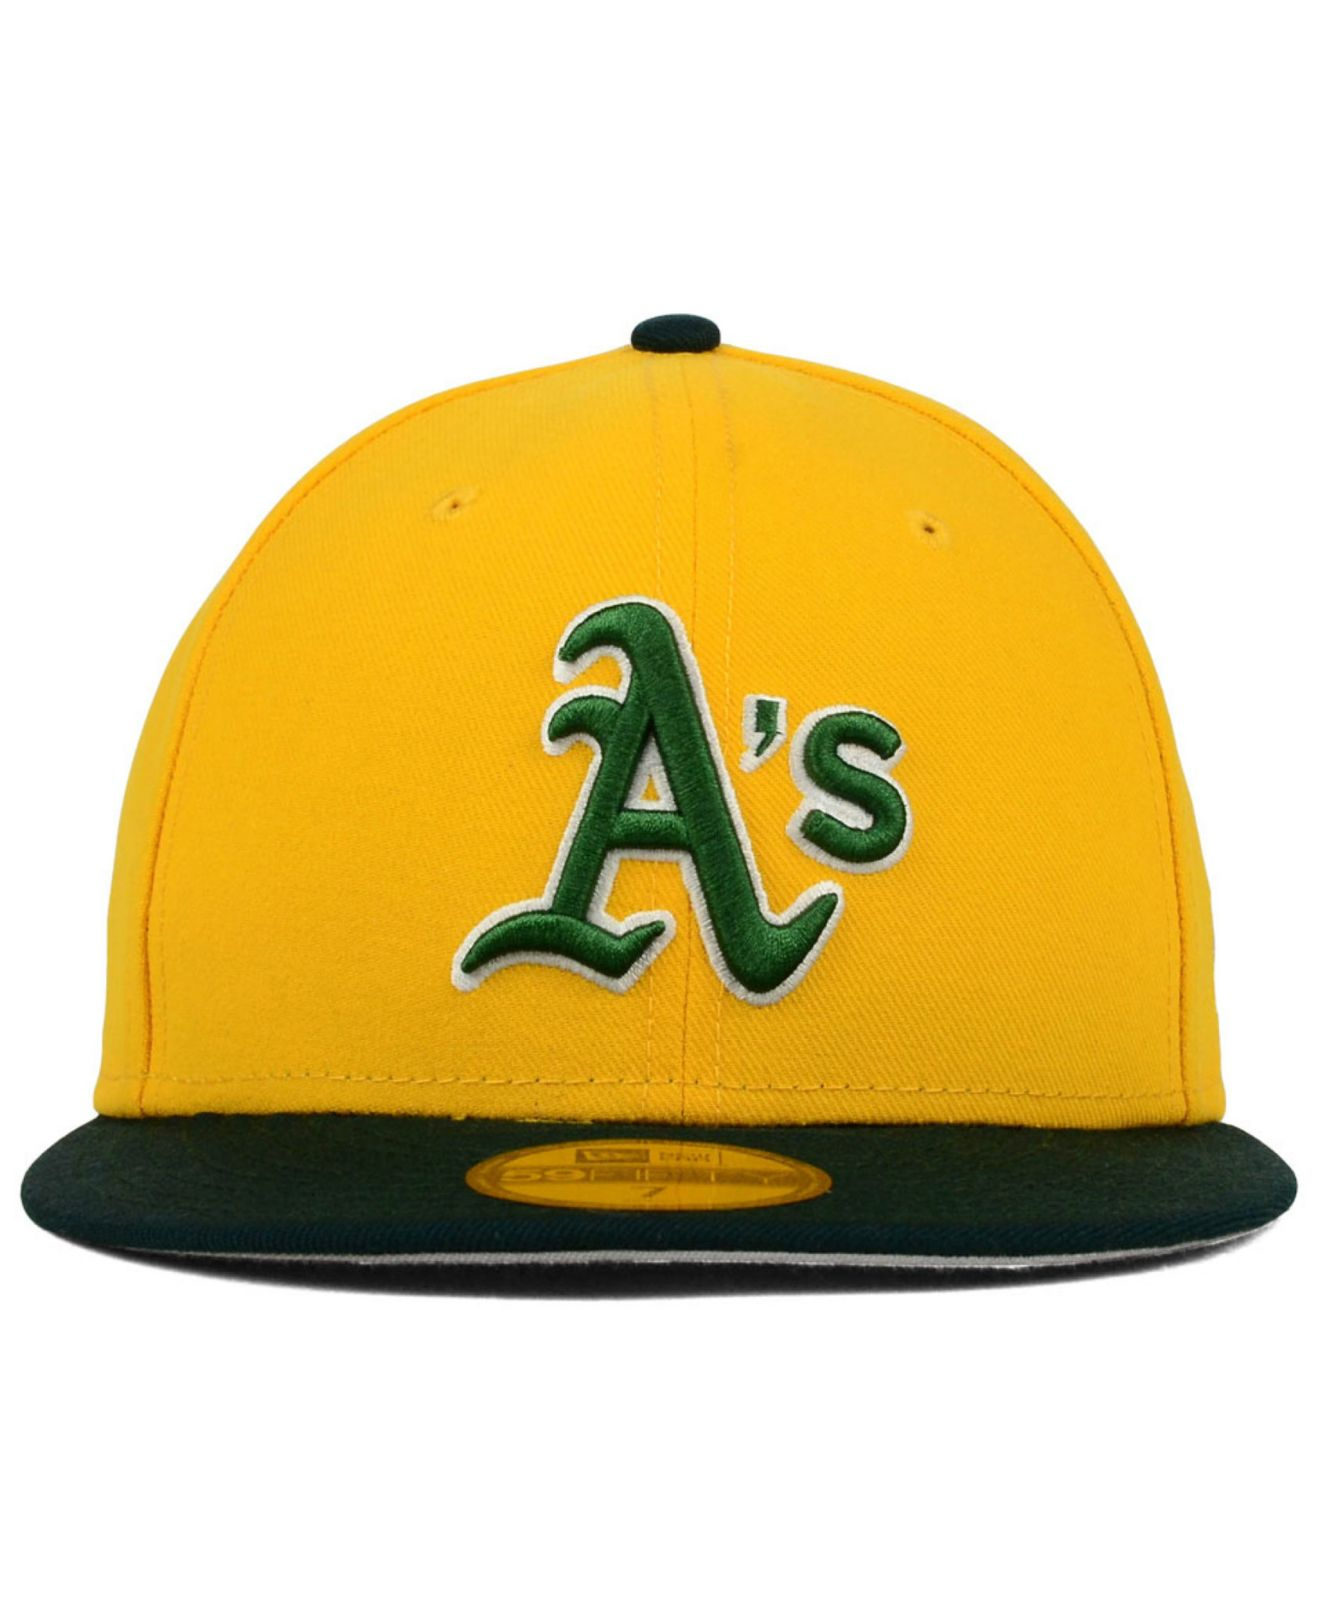 KTZ Oakland Athletics Cooperstown 2-tone 59fifty Cap in Blue for Men